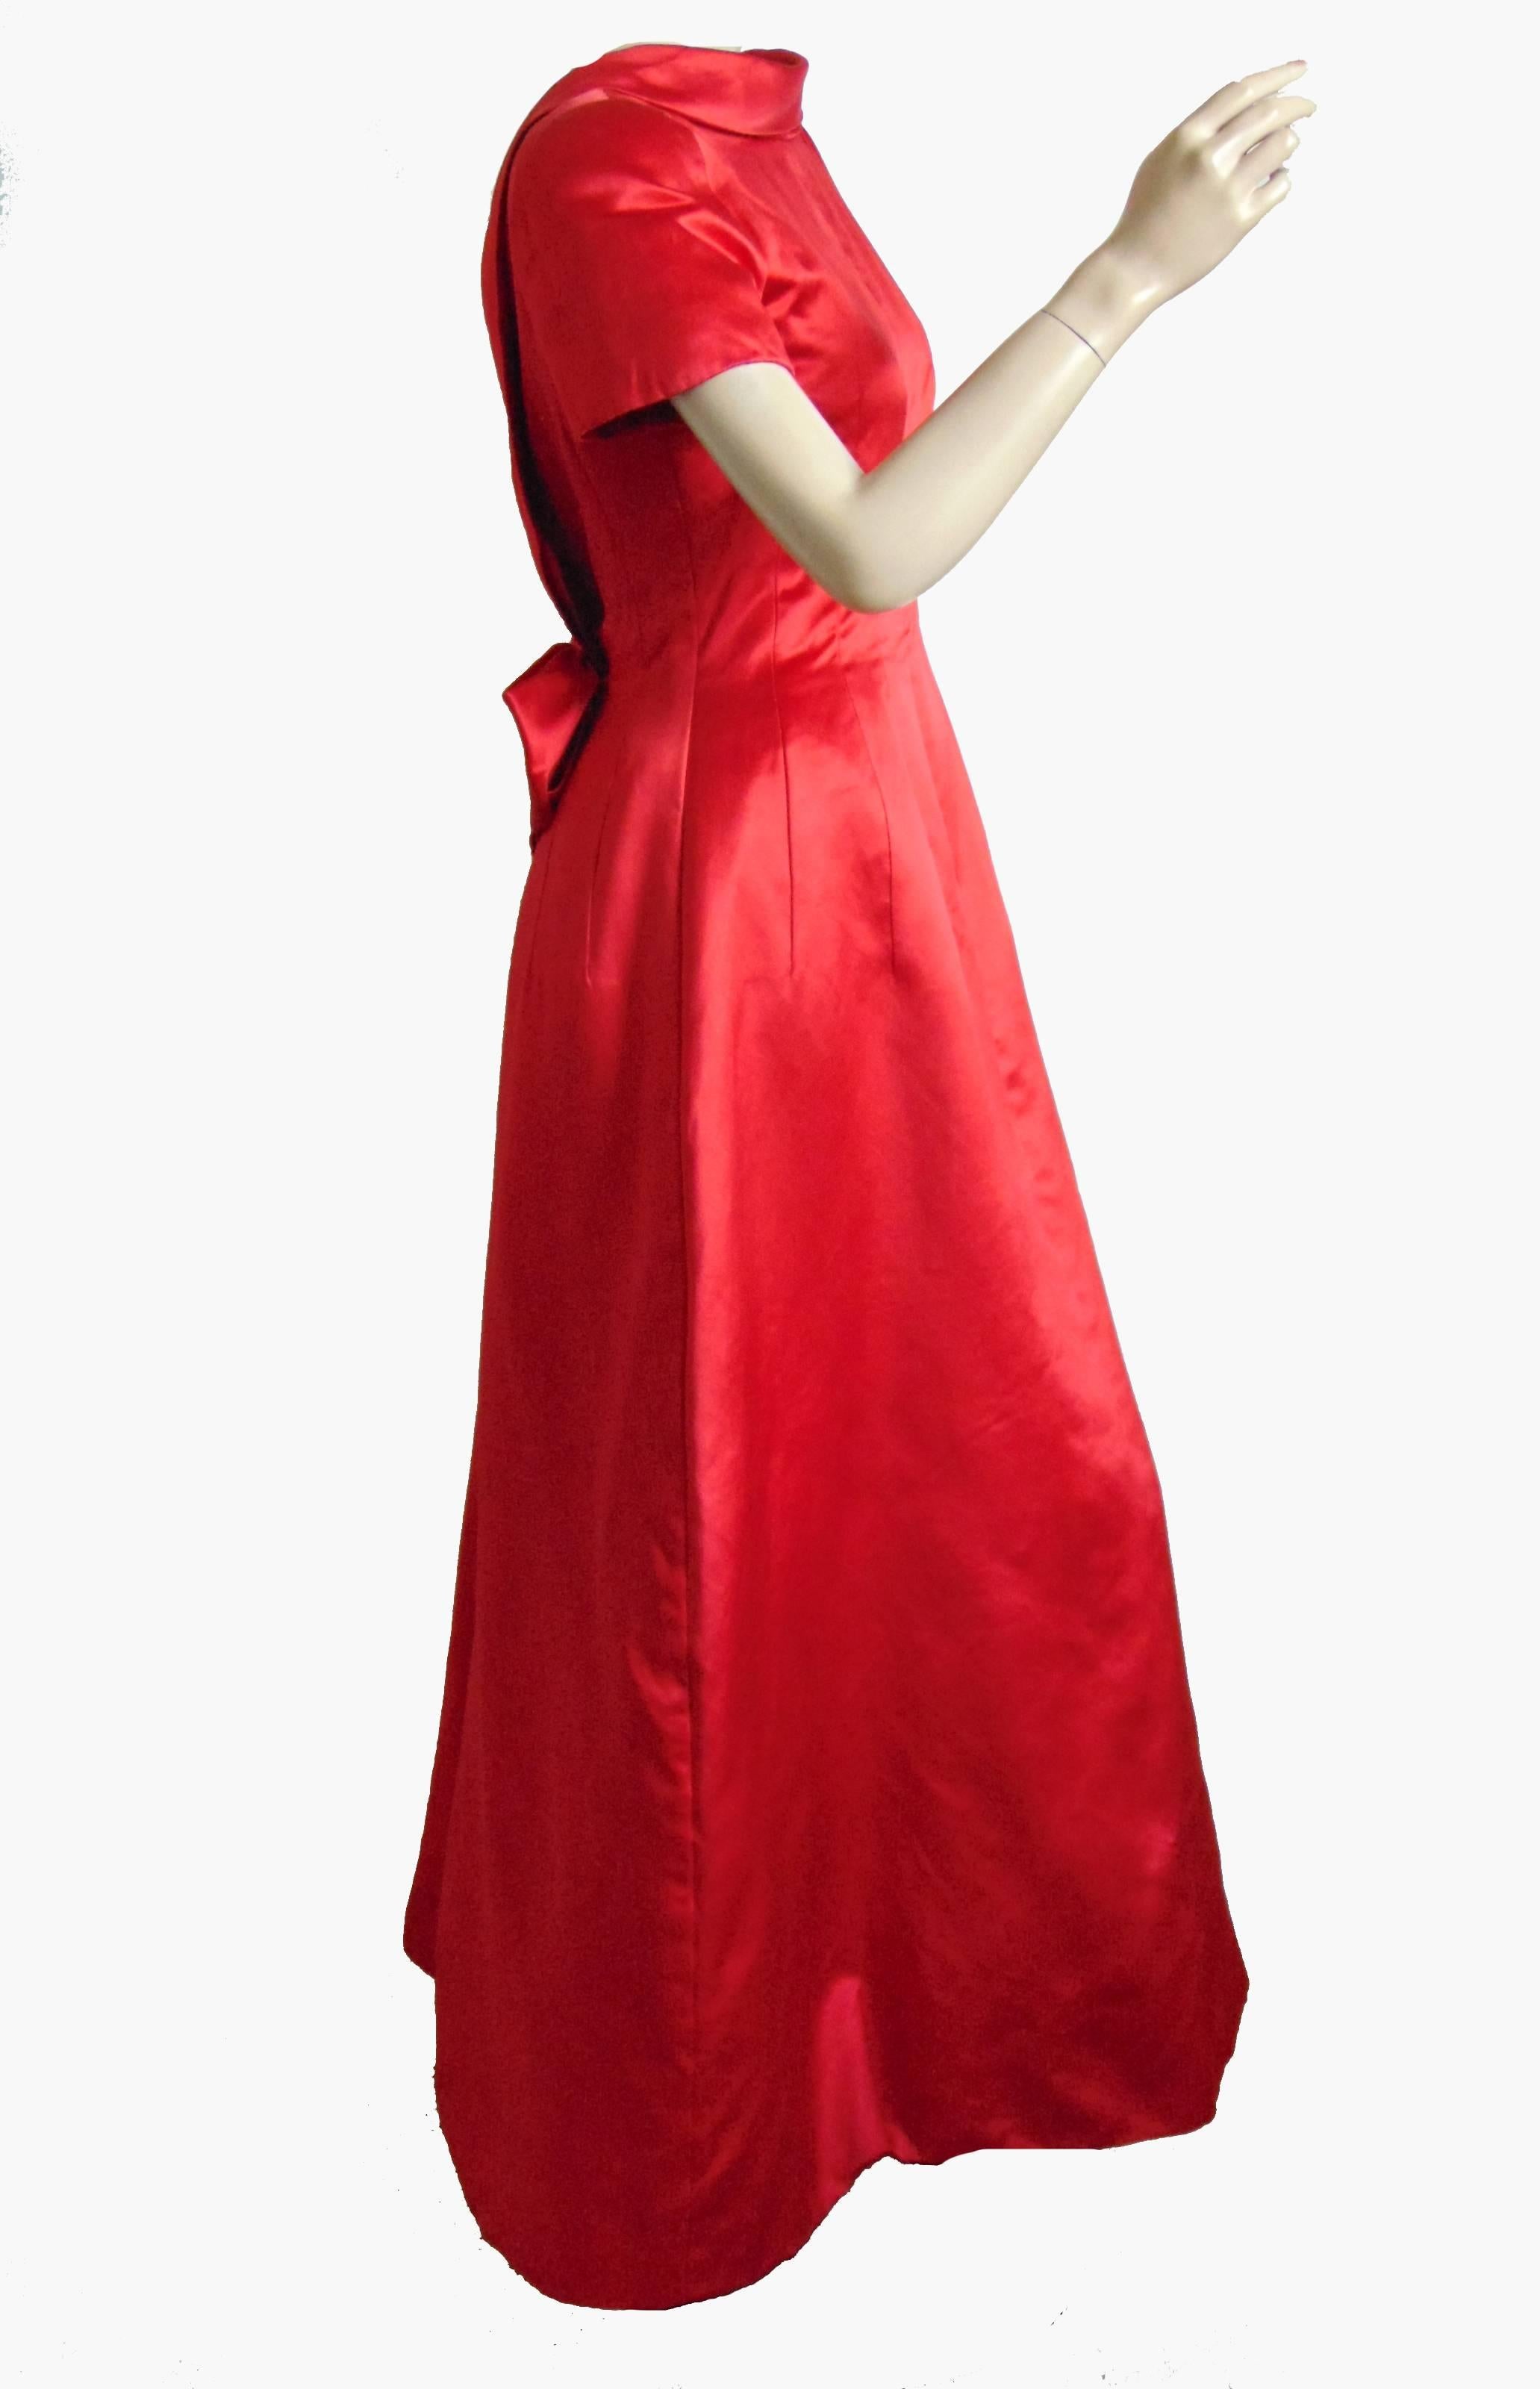 Women's Brilliant Valentino Red Silk Evening Gown with Low Cut Back + Bow Size 10 1990s 